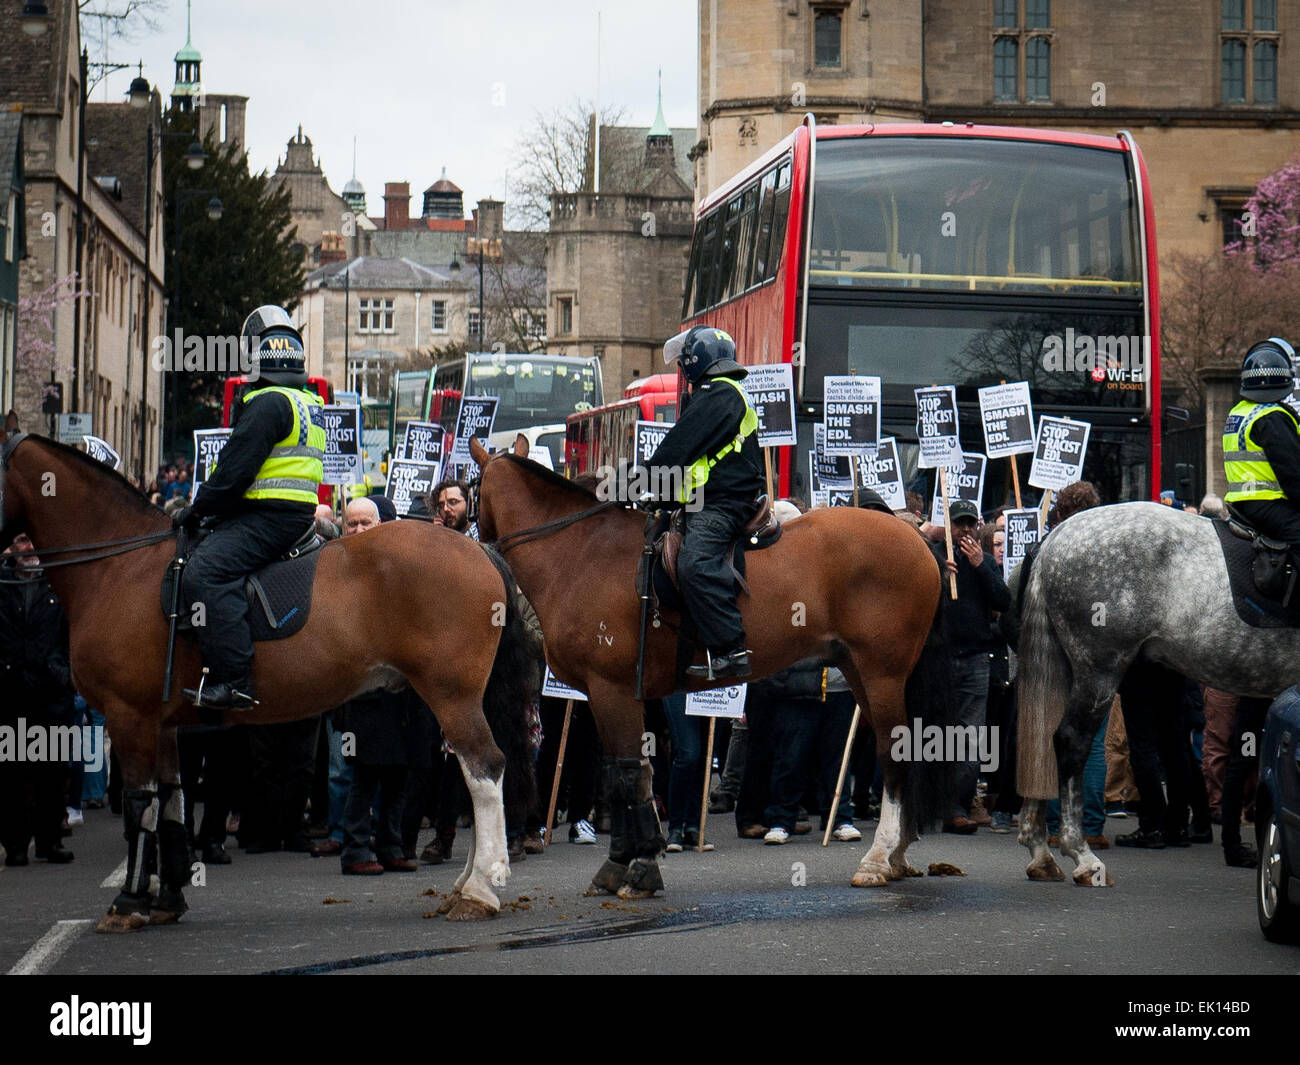 Oxford, UK. 4th April, 2015. St Aldates blocked by police during EDL march through Oxford,UK Credit:  roger askew/Alamy Live News Stock Photo